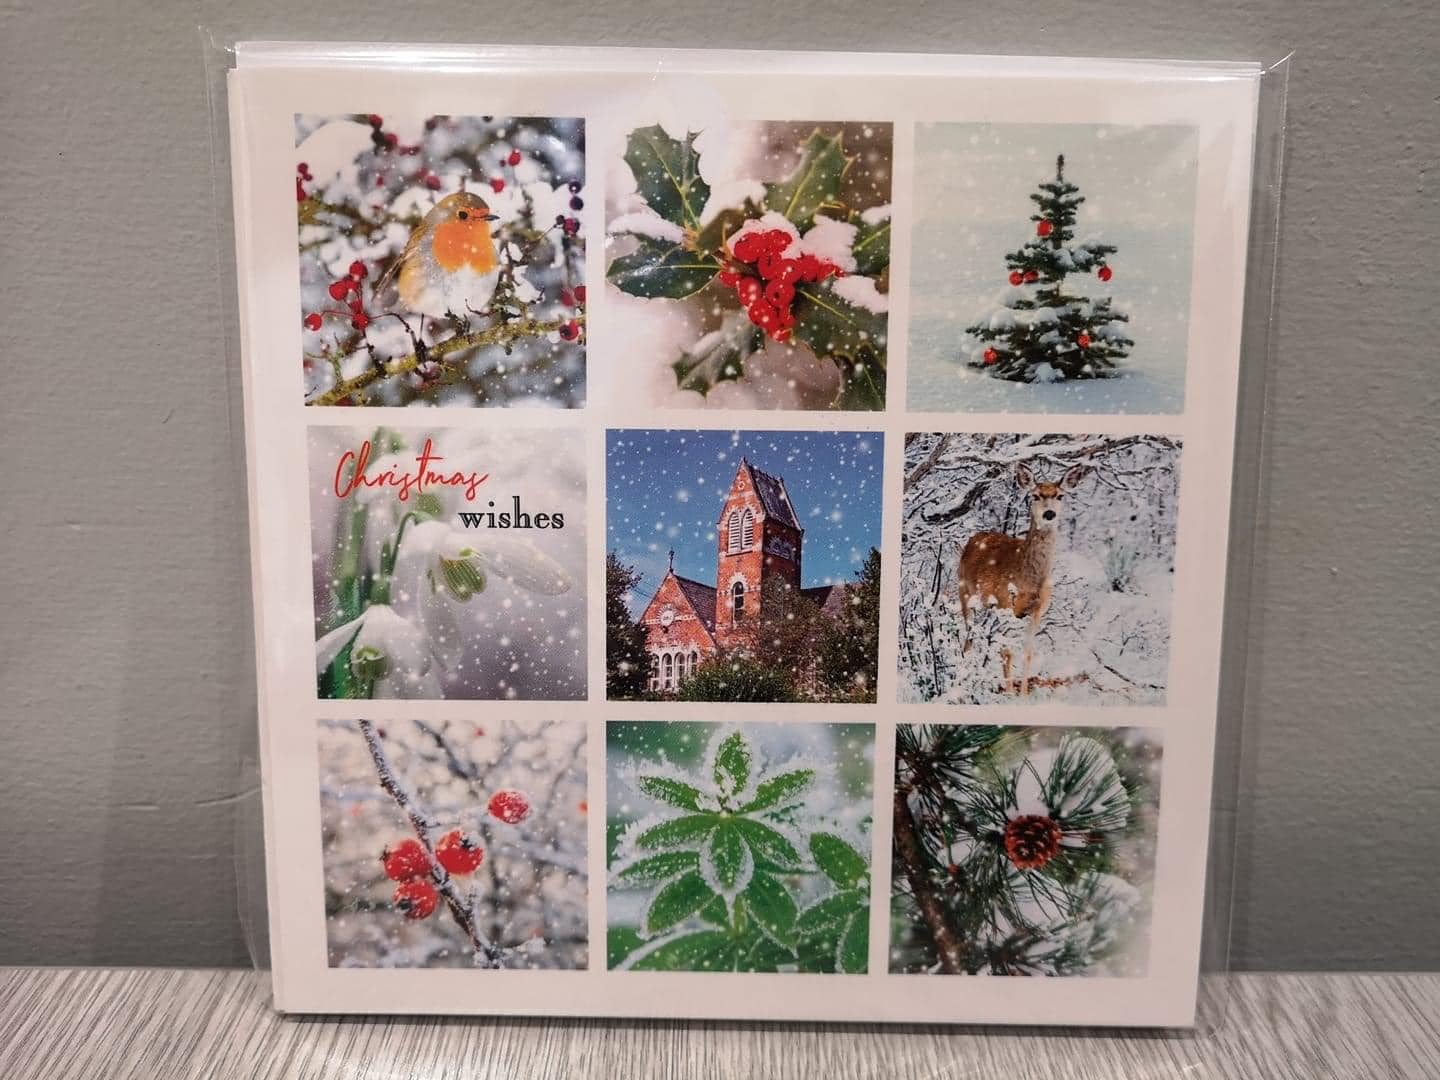 Old Girls' School Christmas cards and calendars